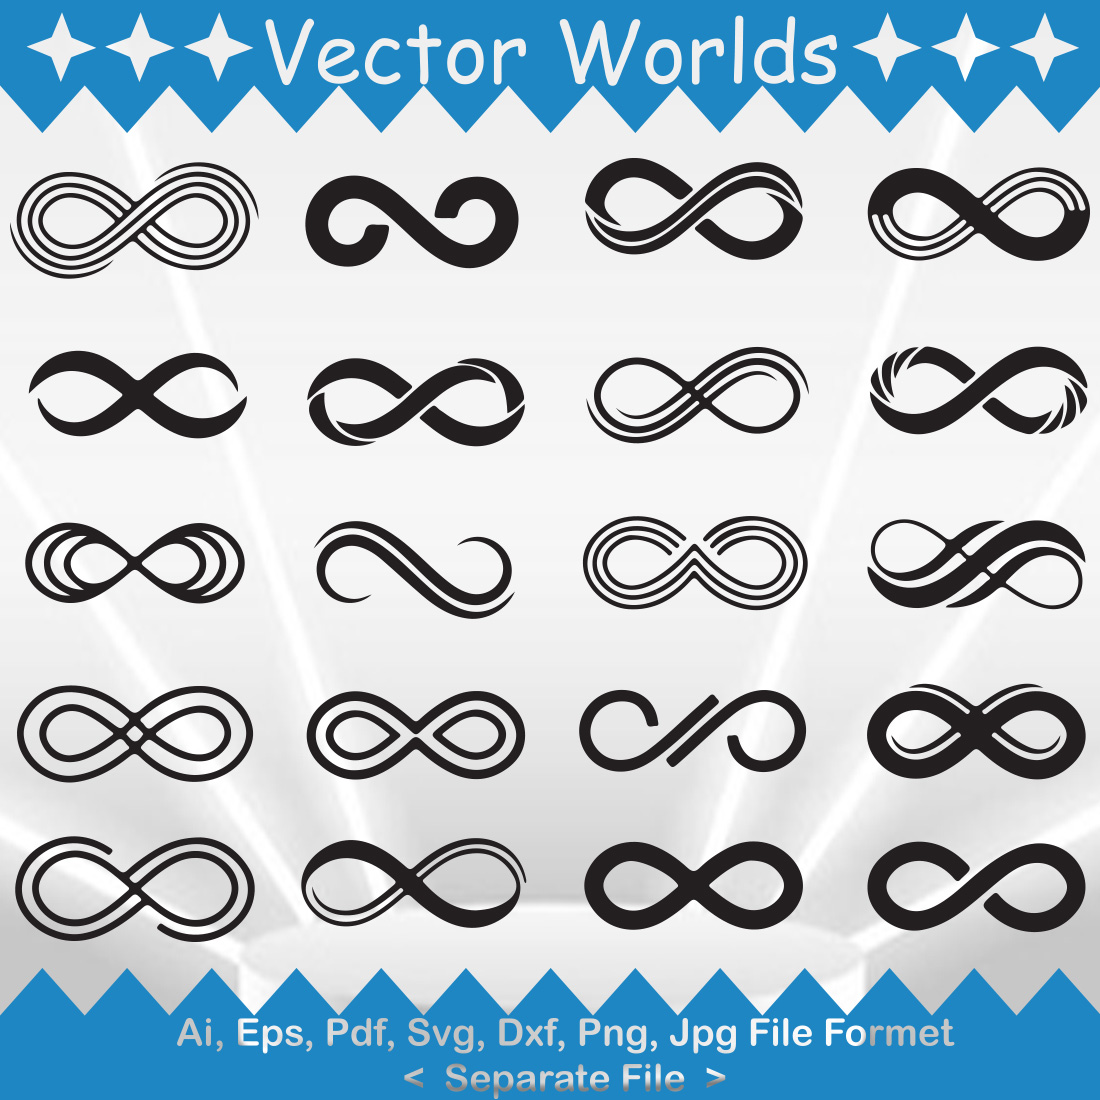 Infinity sign SVG Vector Design cover image.